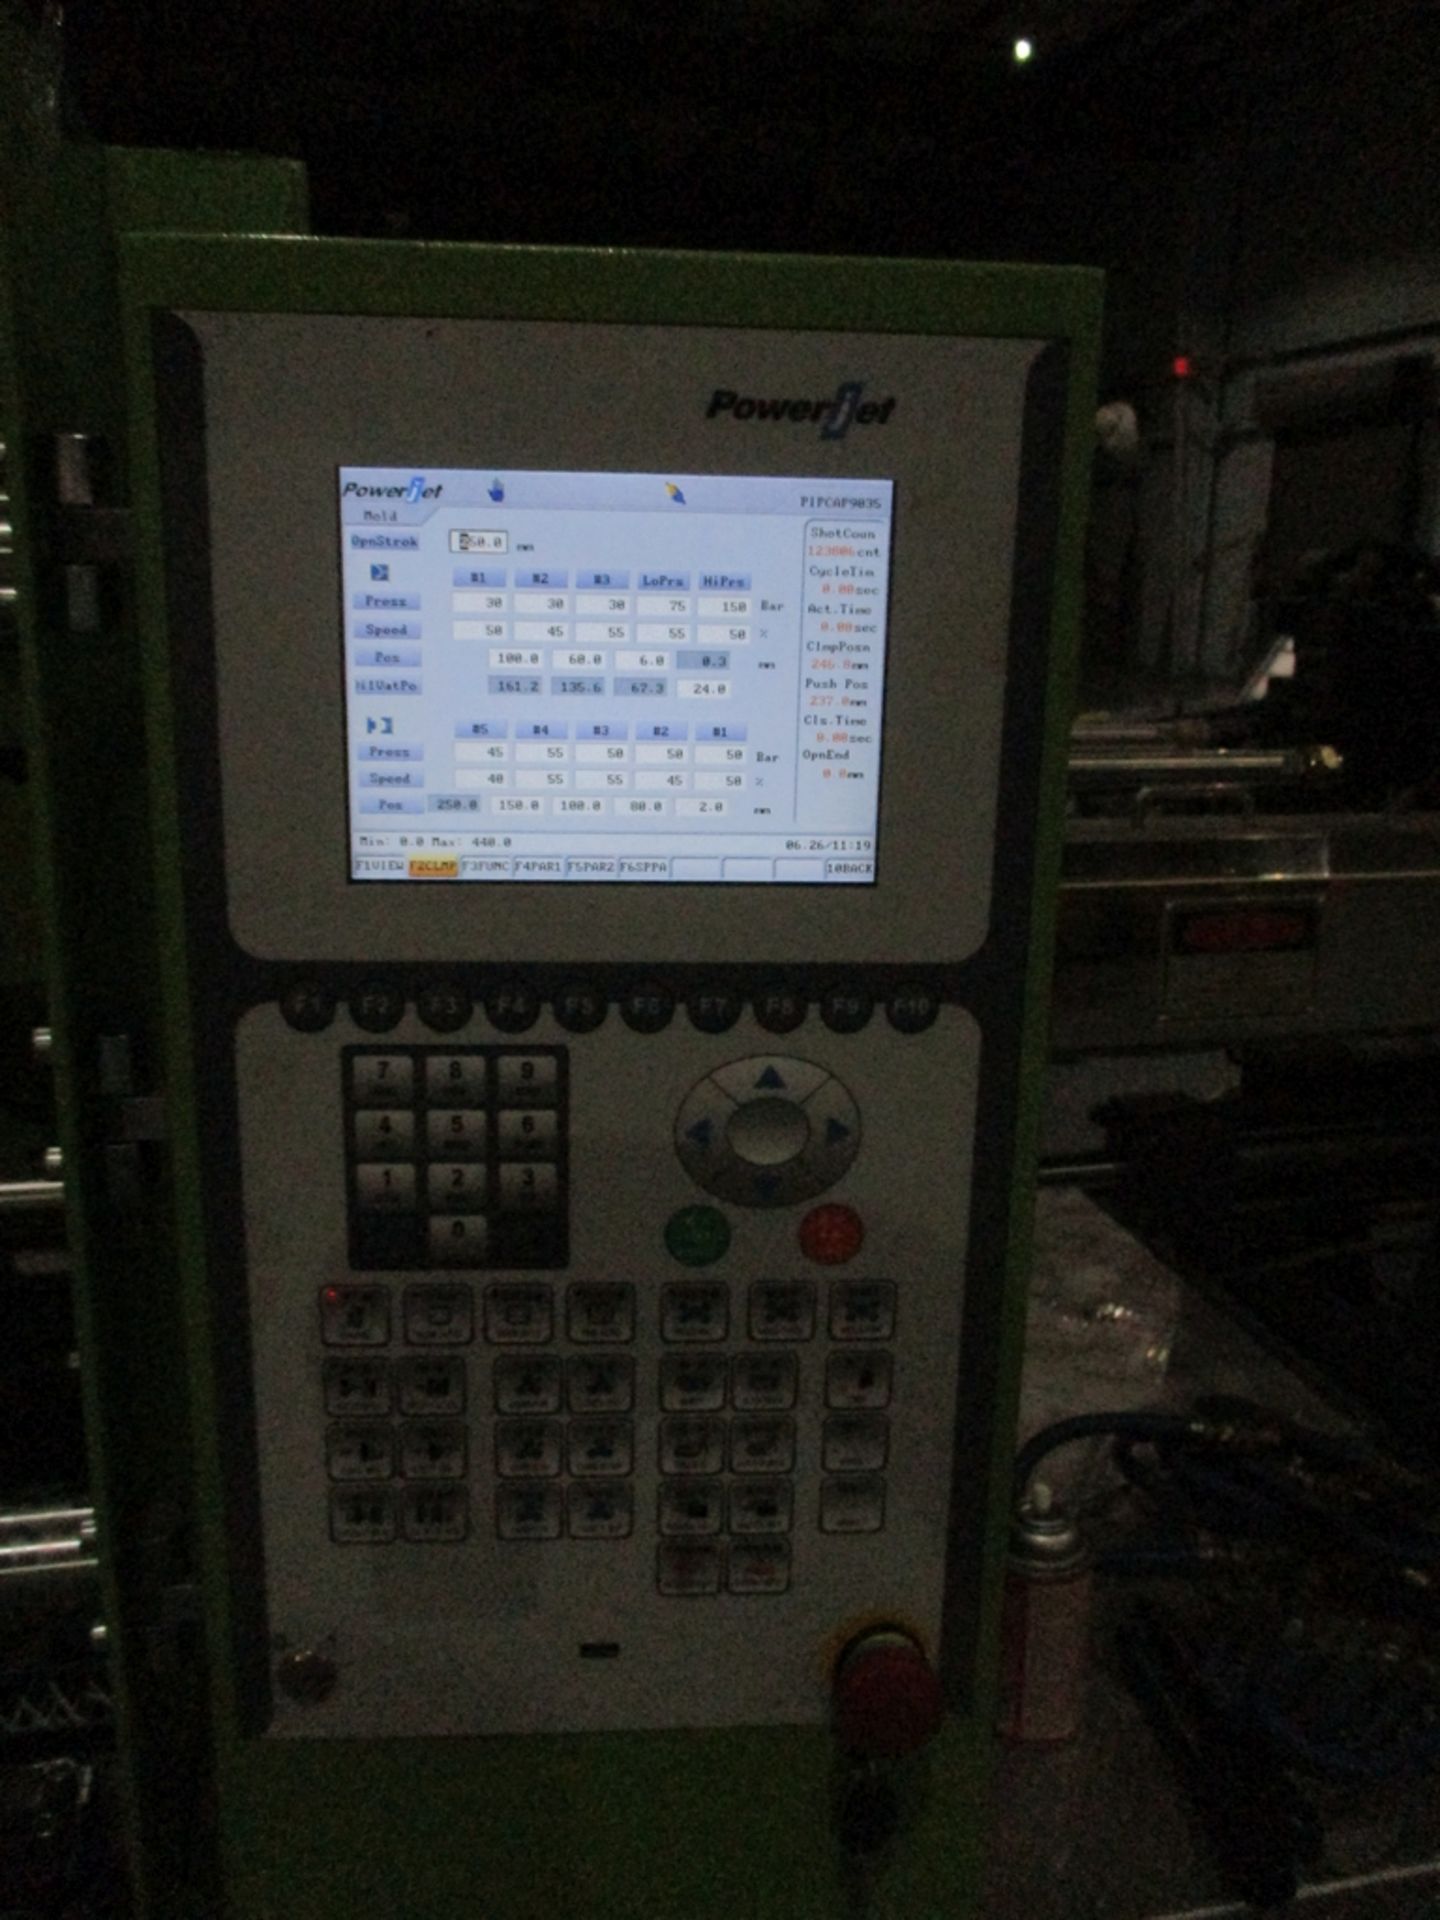 Powerjet BJ160-V6 160-Ton Injection Molding Machine - Variable Pump; Clamping Force: 160 Ton; - Image 15 of 15